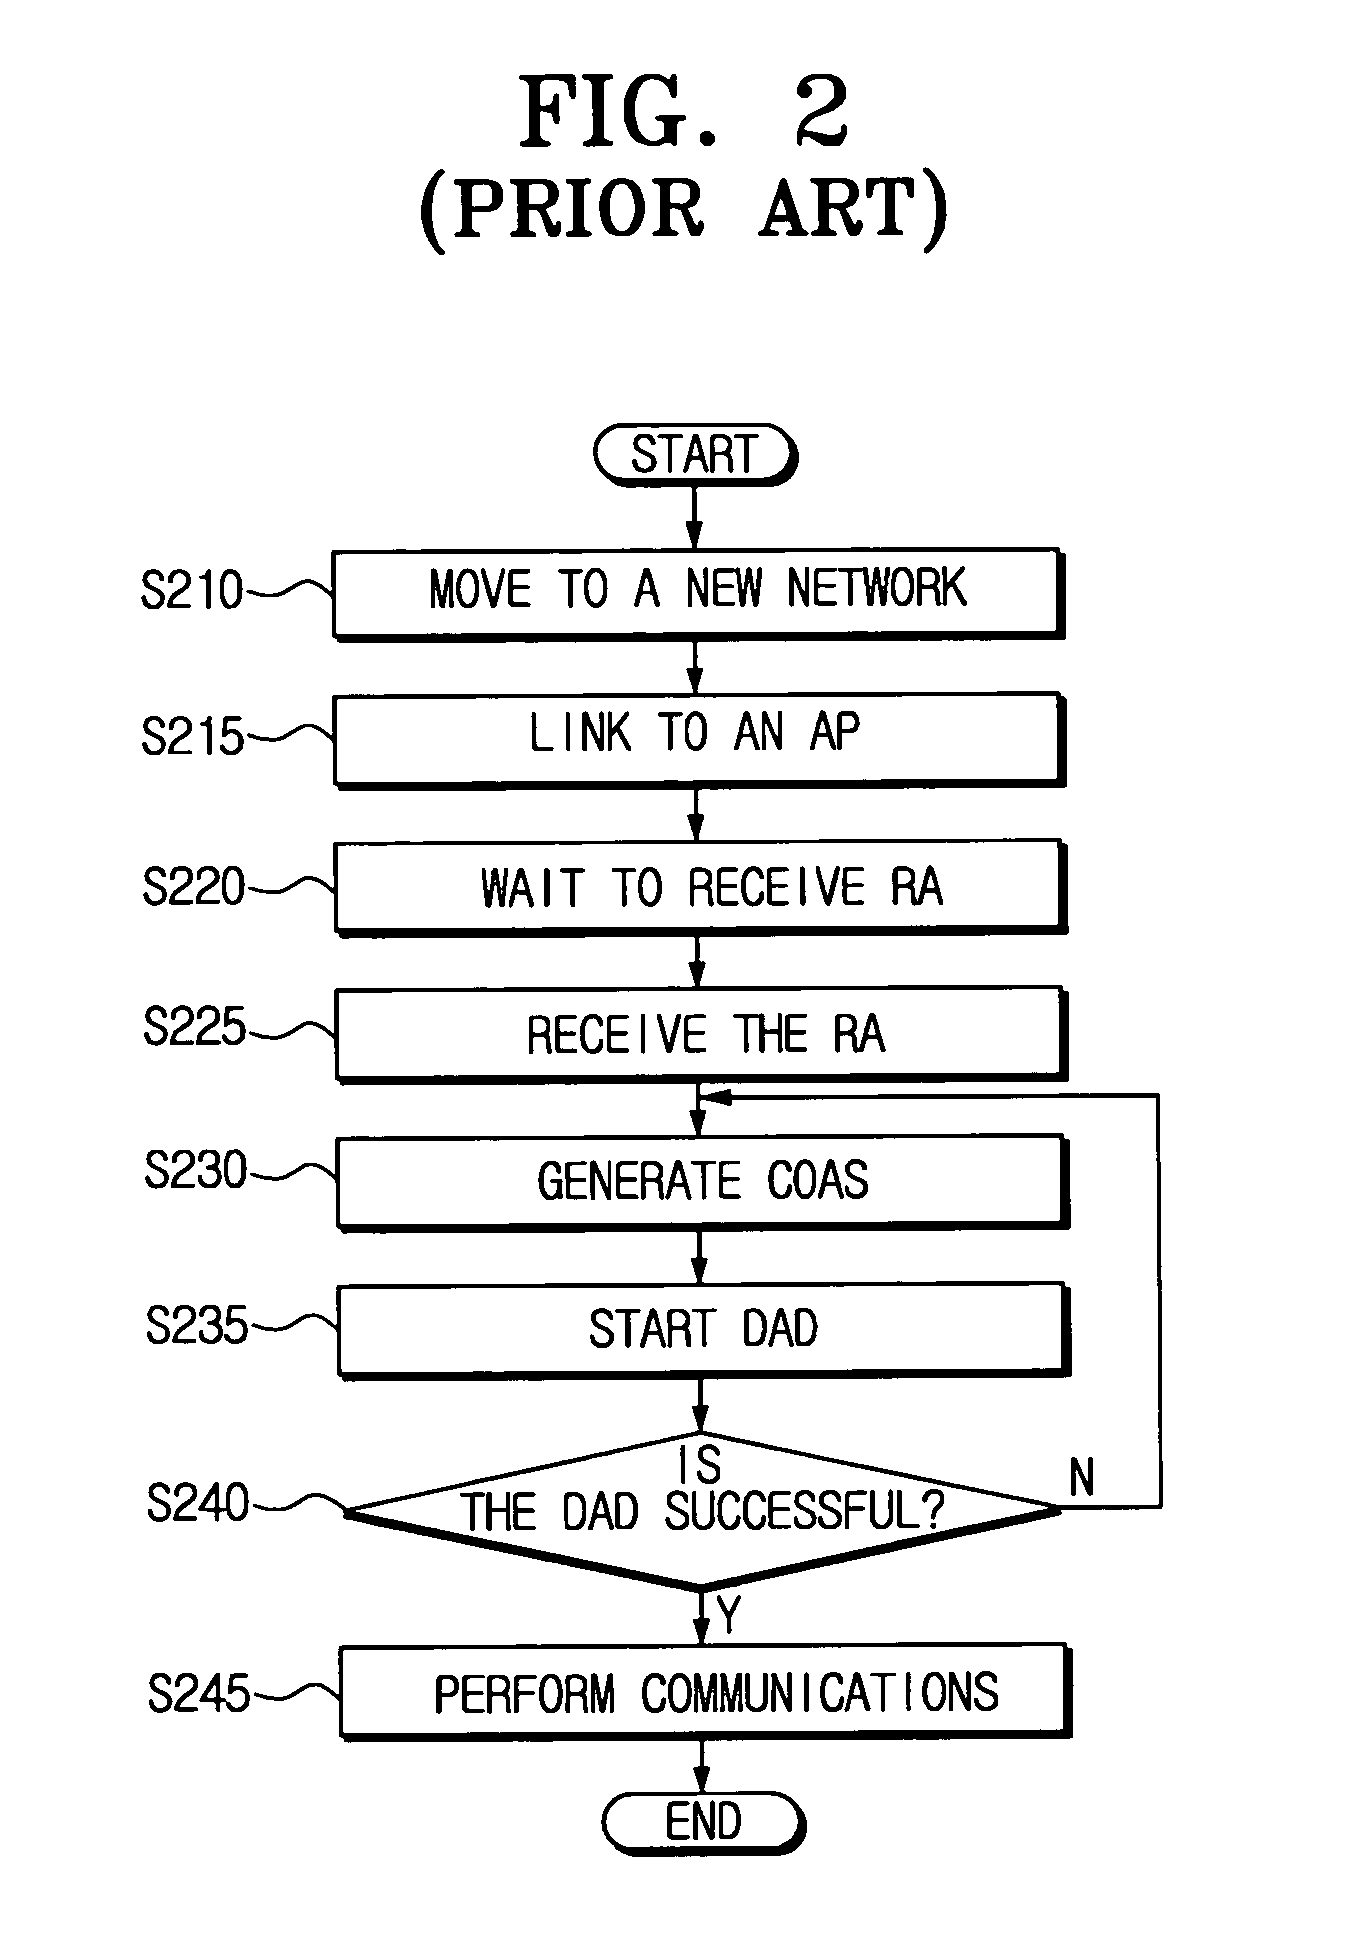 Fast handoff method with CoA pre-reservation and routing in use of access point in wireless networks